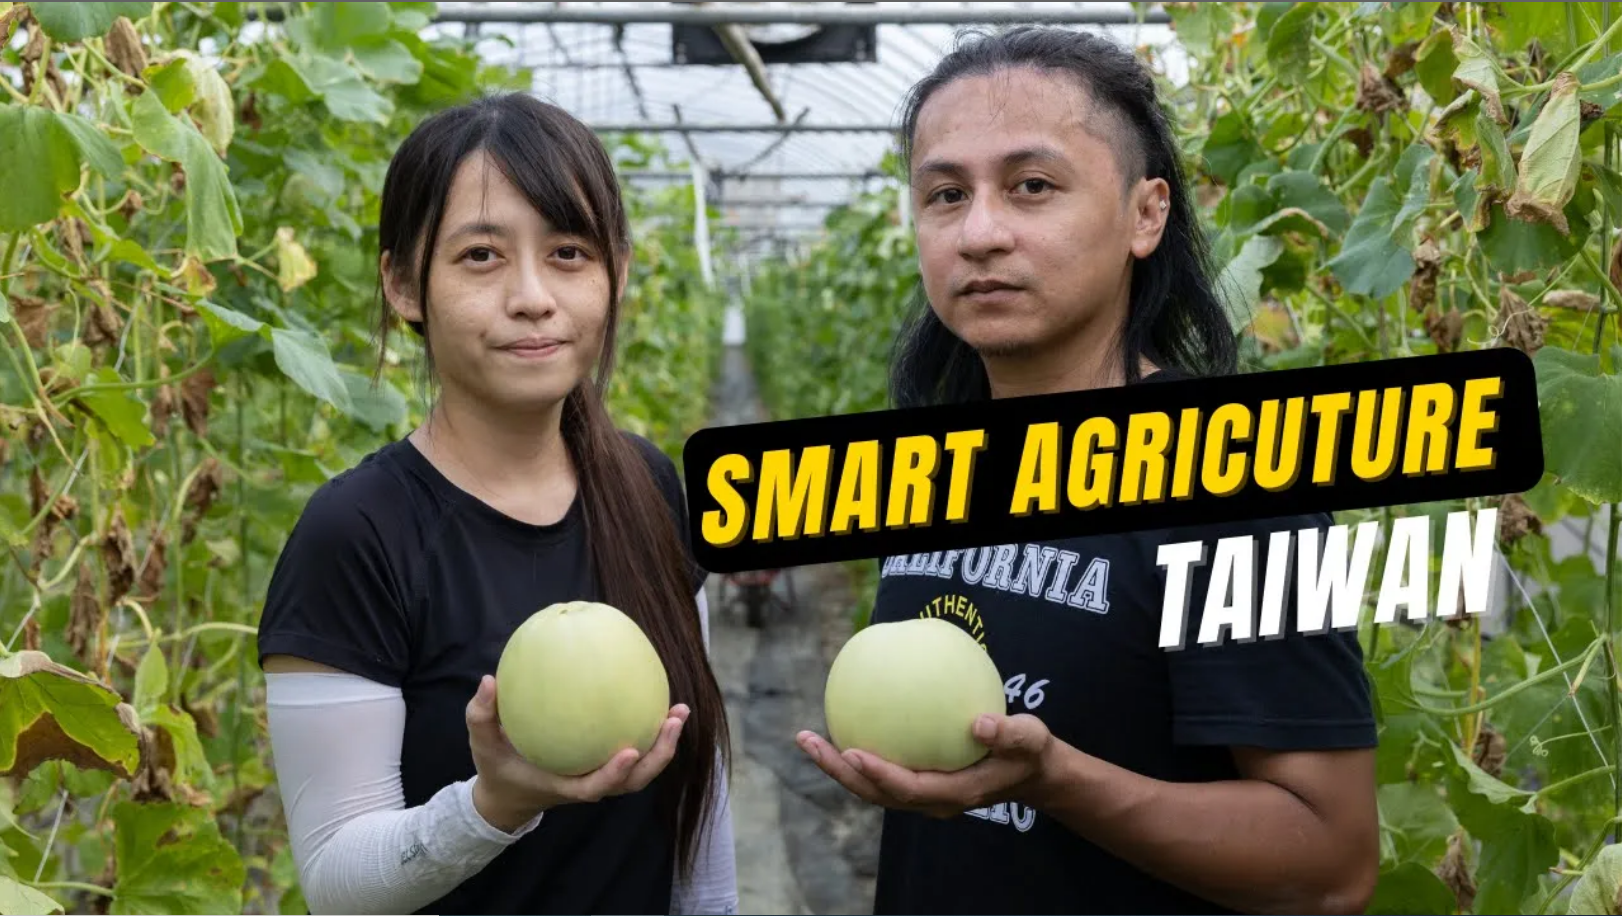 Taiwan harnesses smart agriculture to promote digital equality for farmers